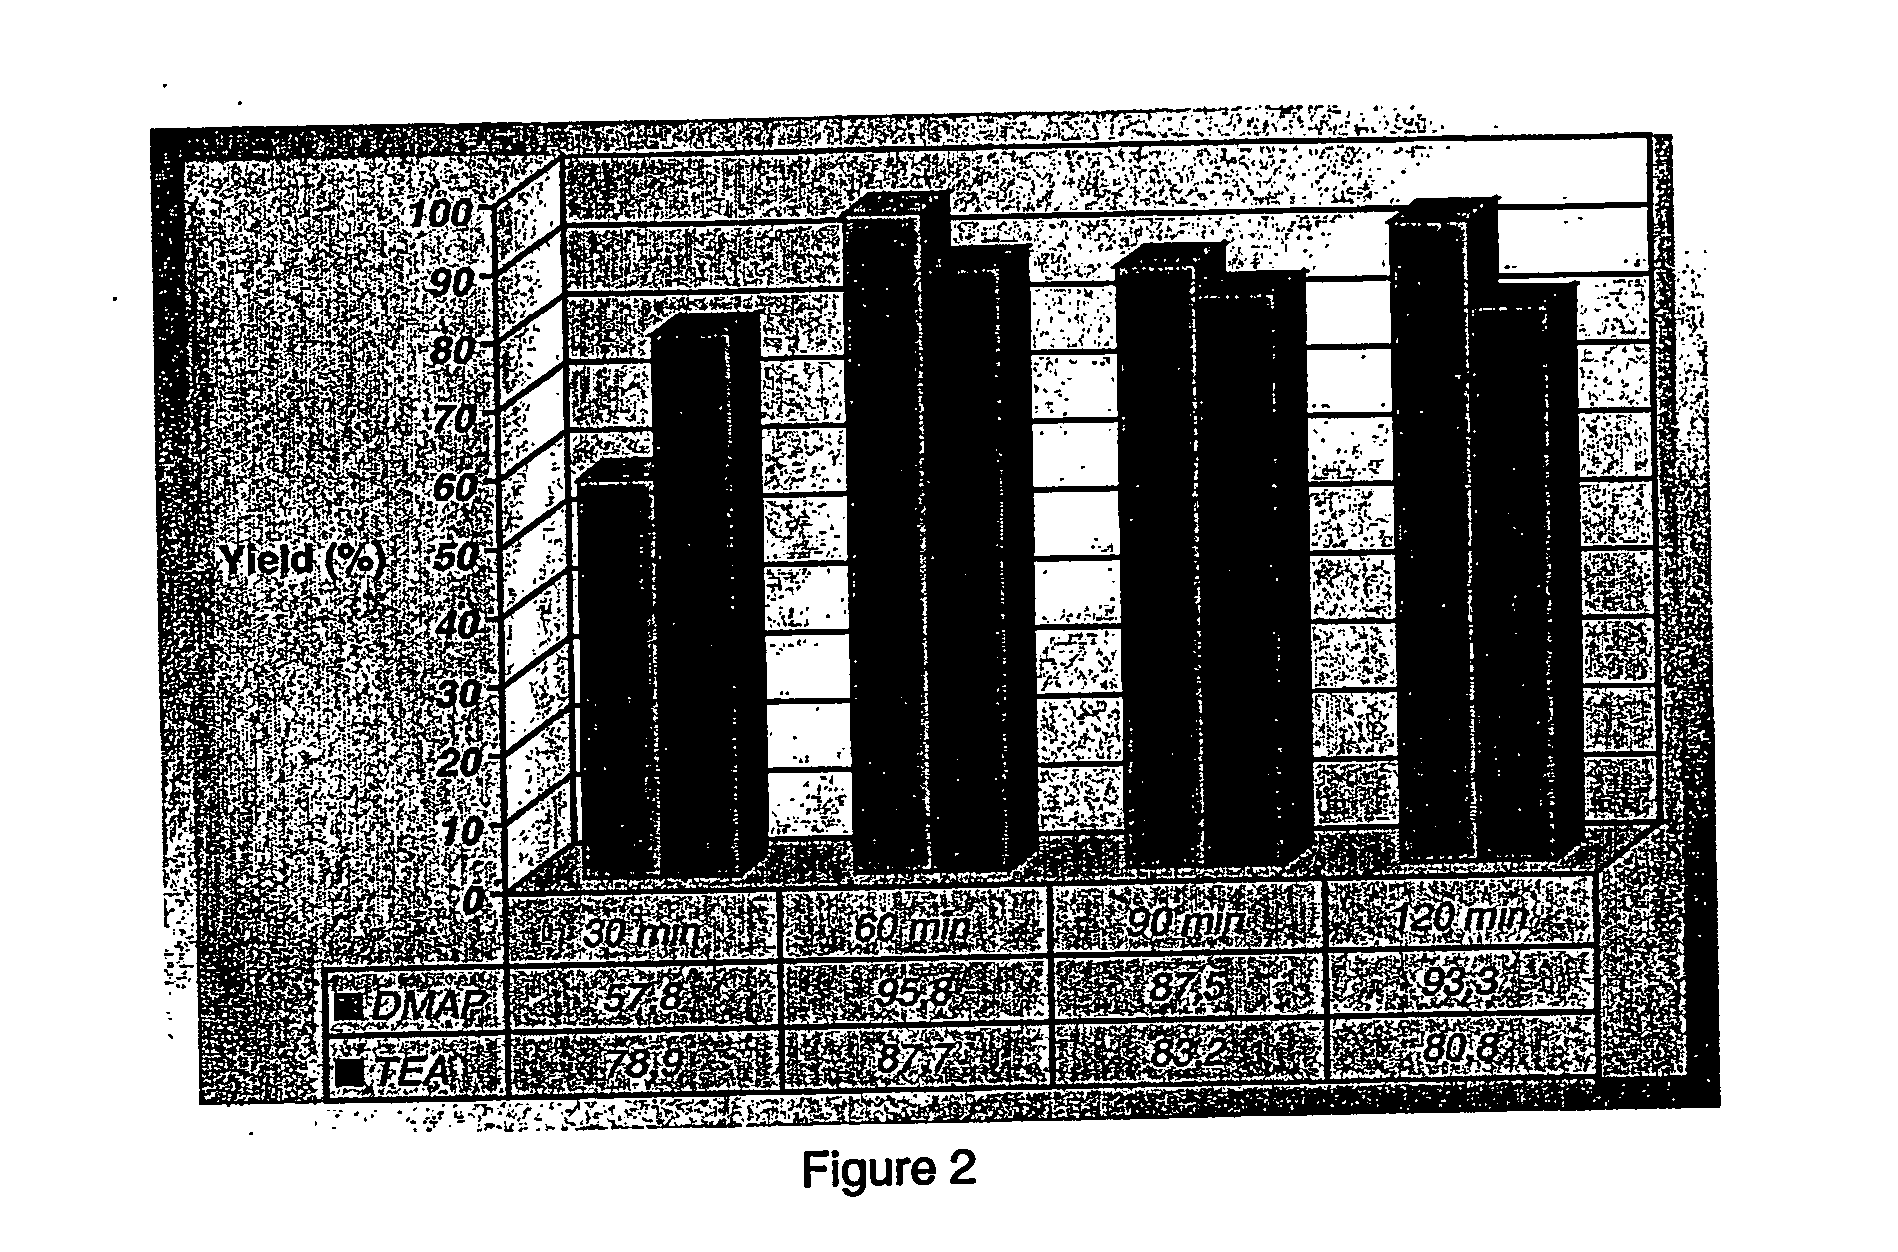 Process for the preparation of activated polyethylene glycols